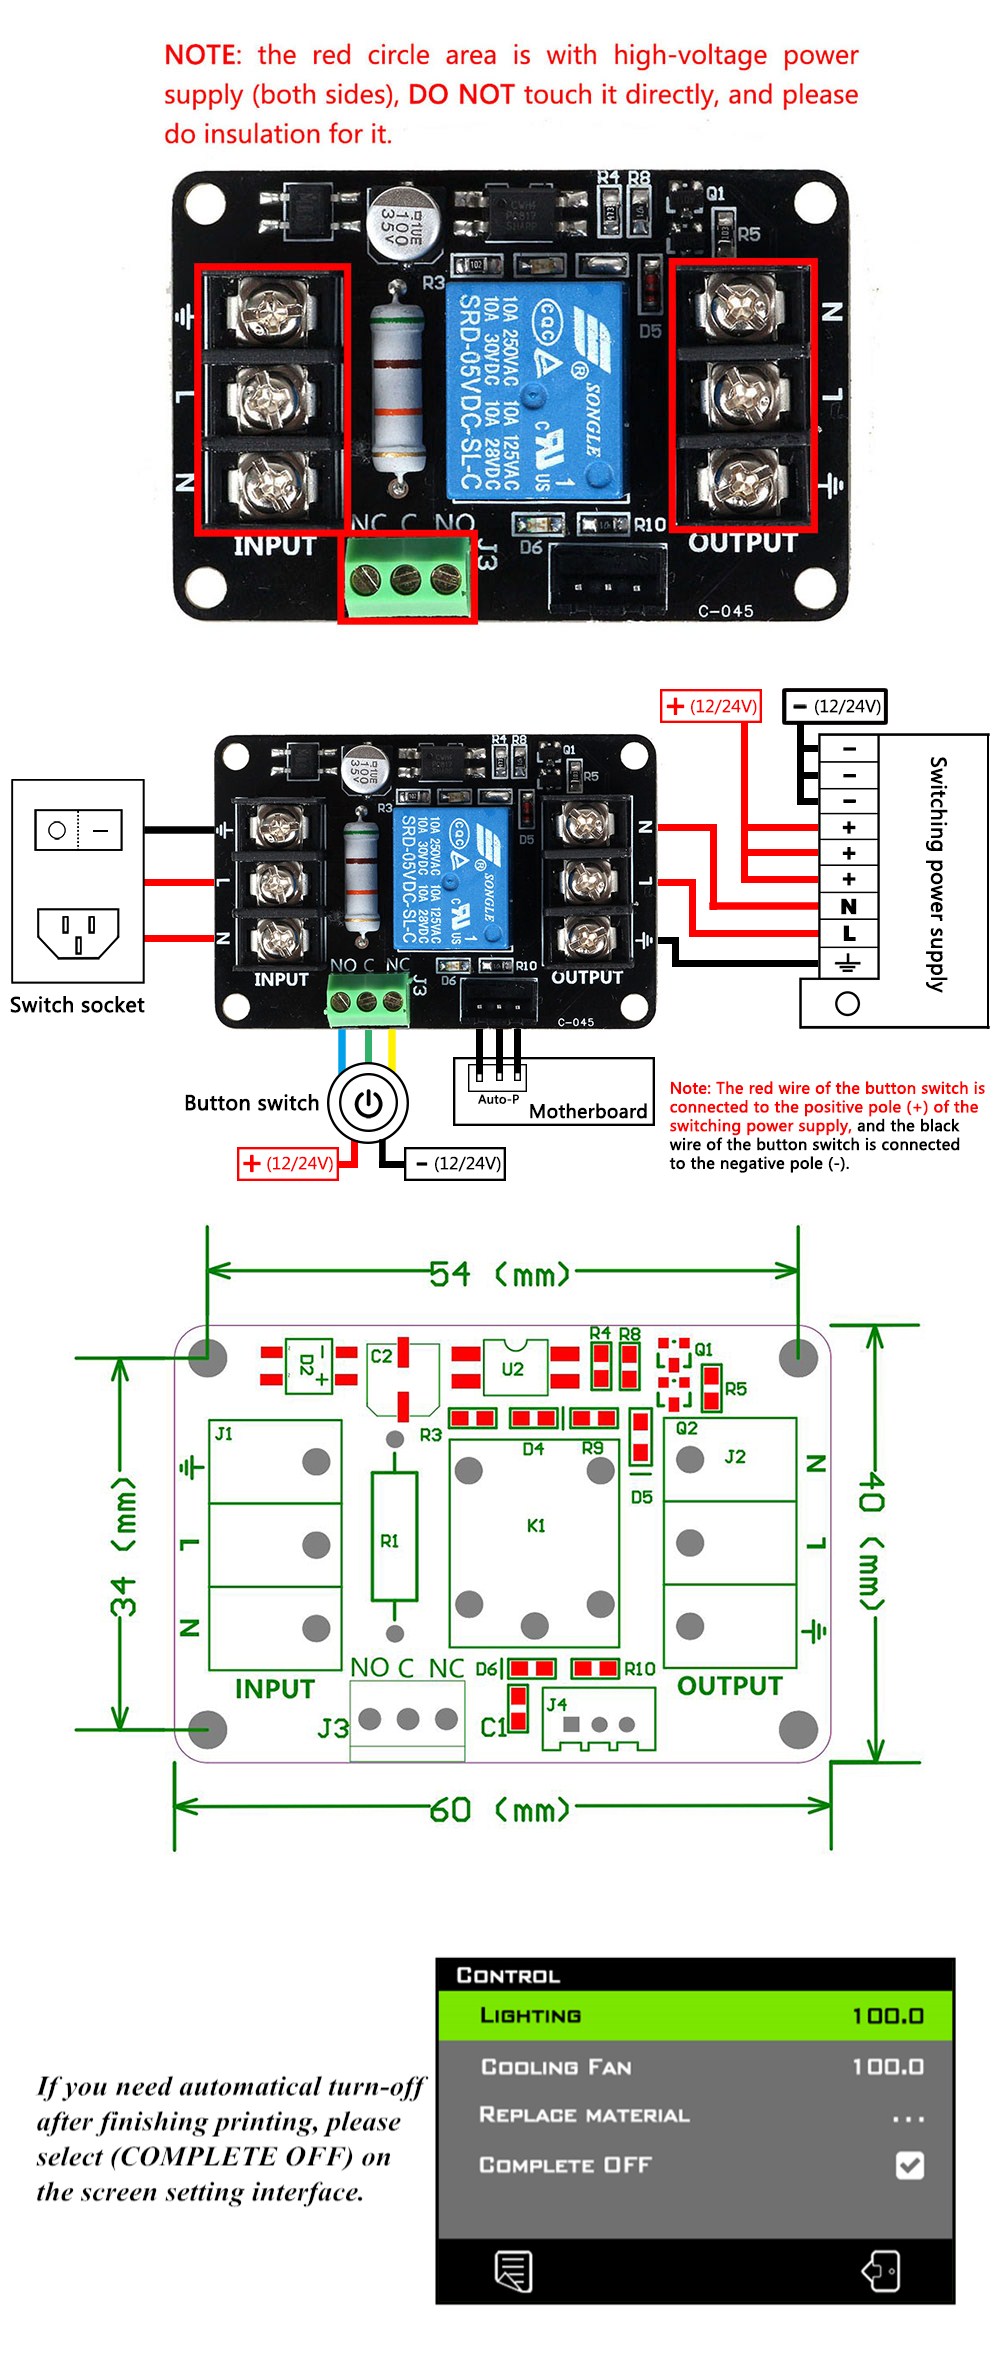 Power-Monitoring-Module-Kit-Power-Off-Continued-to-Play-Module-For-Lerdge-Motherboard-3D-Printer-Par-1316047-1